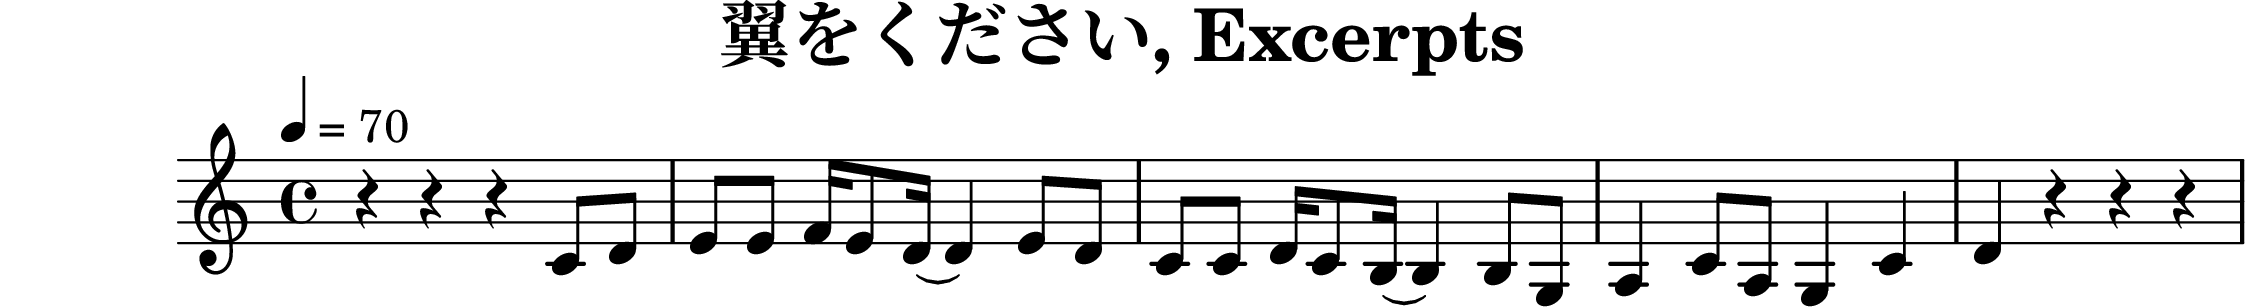 \version "2.20.0"
\header {
  title = "翼をください, Excerpts"
}

\score {
  <<
    \new Staff \relative c' {
        \time 4/4
        \tempo 4 = 70
        r4 r r c8 d                  e8 e f16 e8 d16 (d4) e8 d
        c8 c d16 c8 b16 (b4) b8 g    a4 c8 a g4 c4
        d4 r r r
  }
  >>

  \layout {}
  \midi {}
}